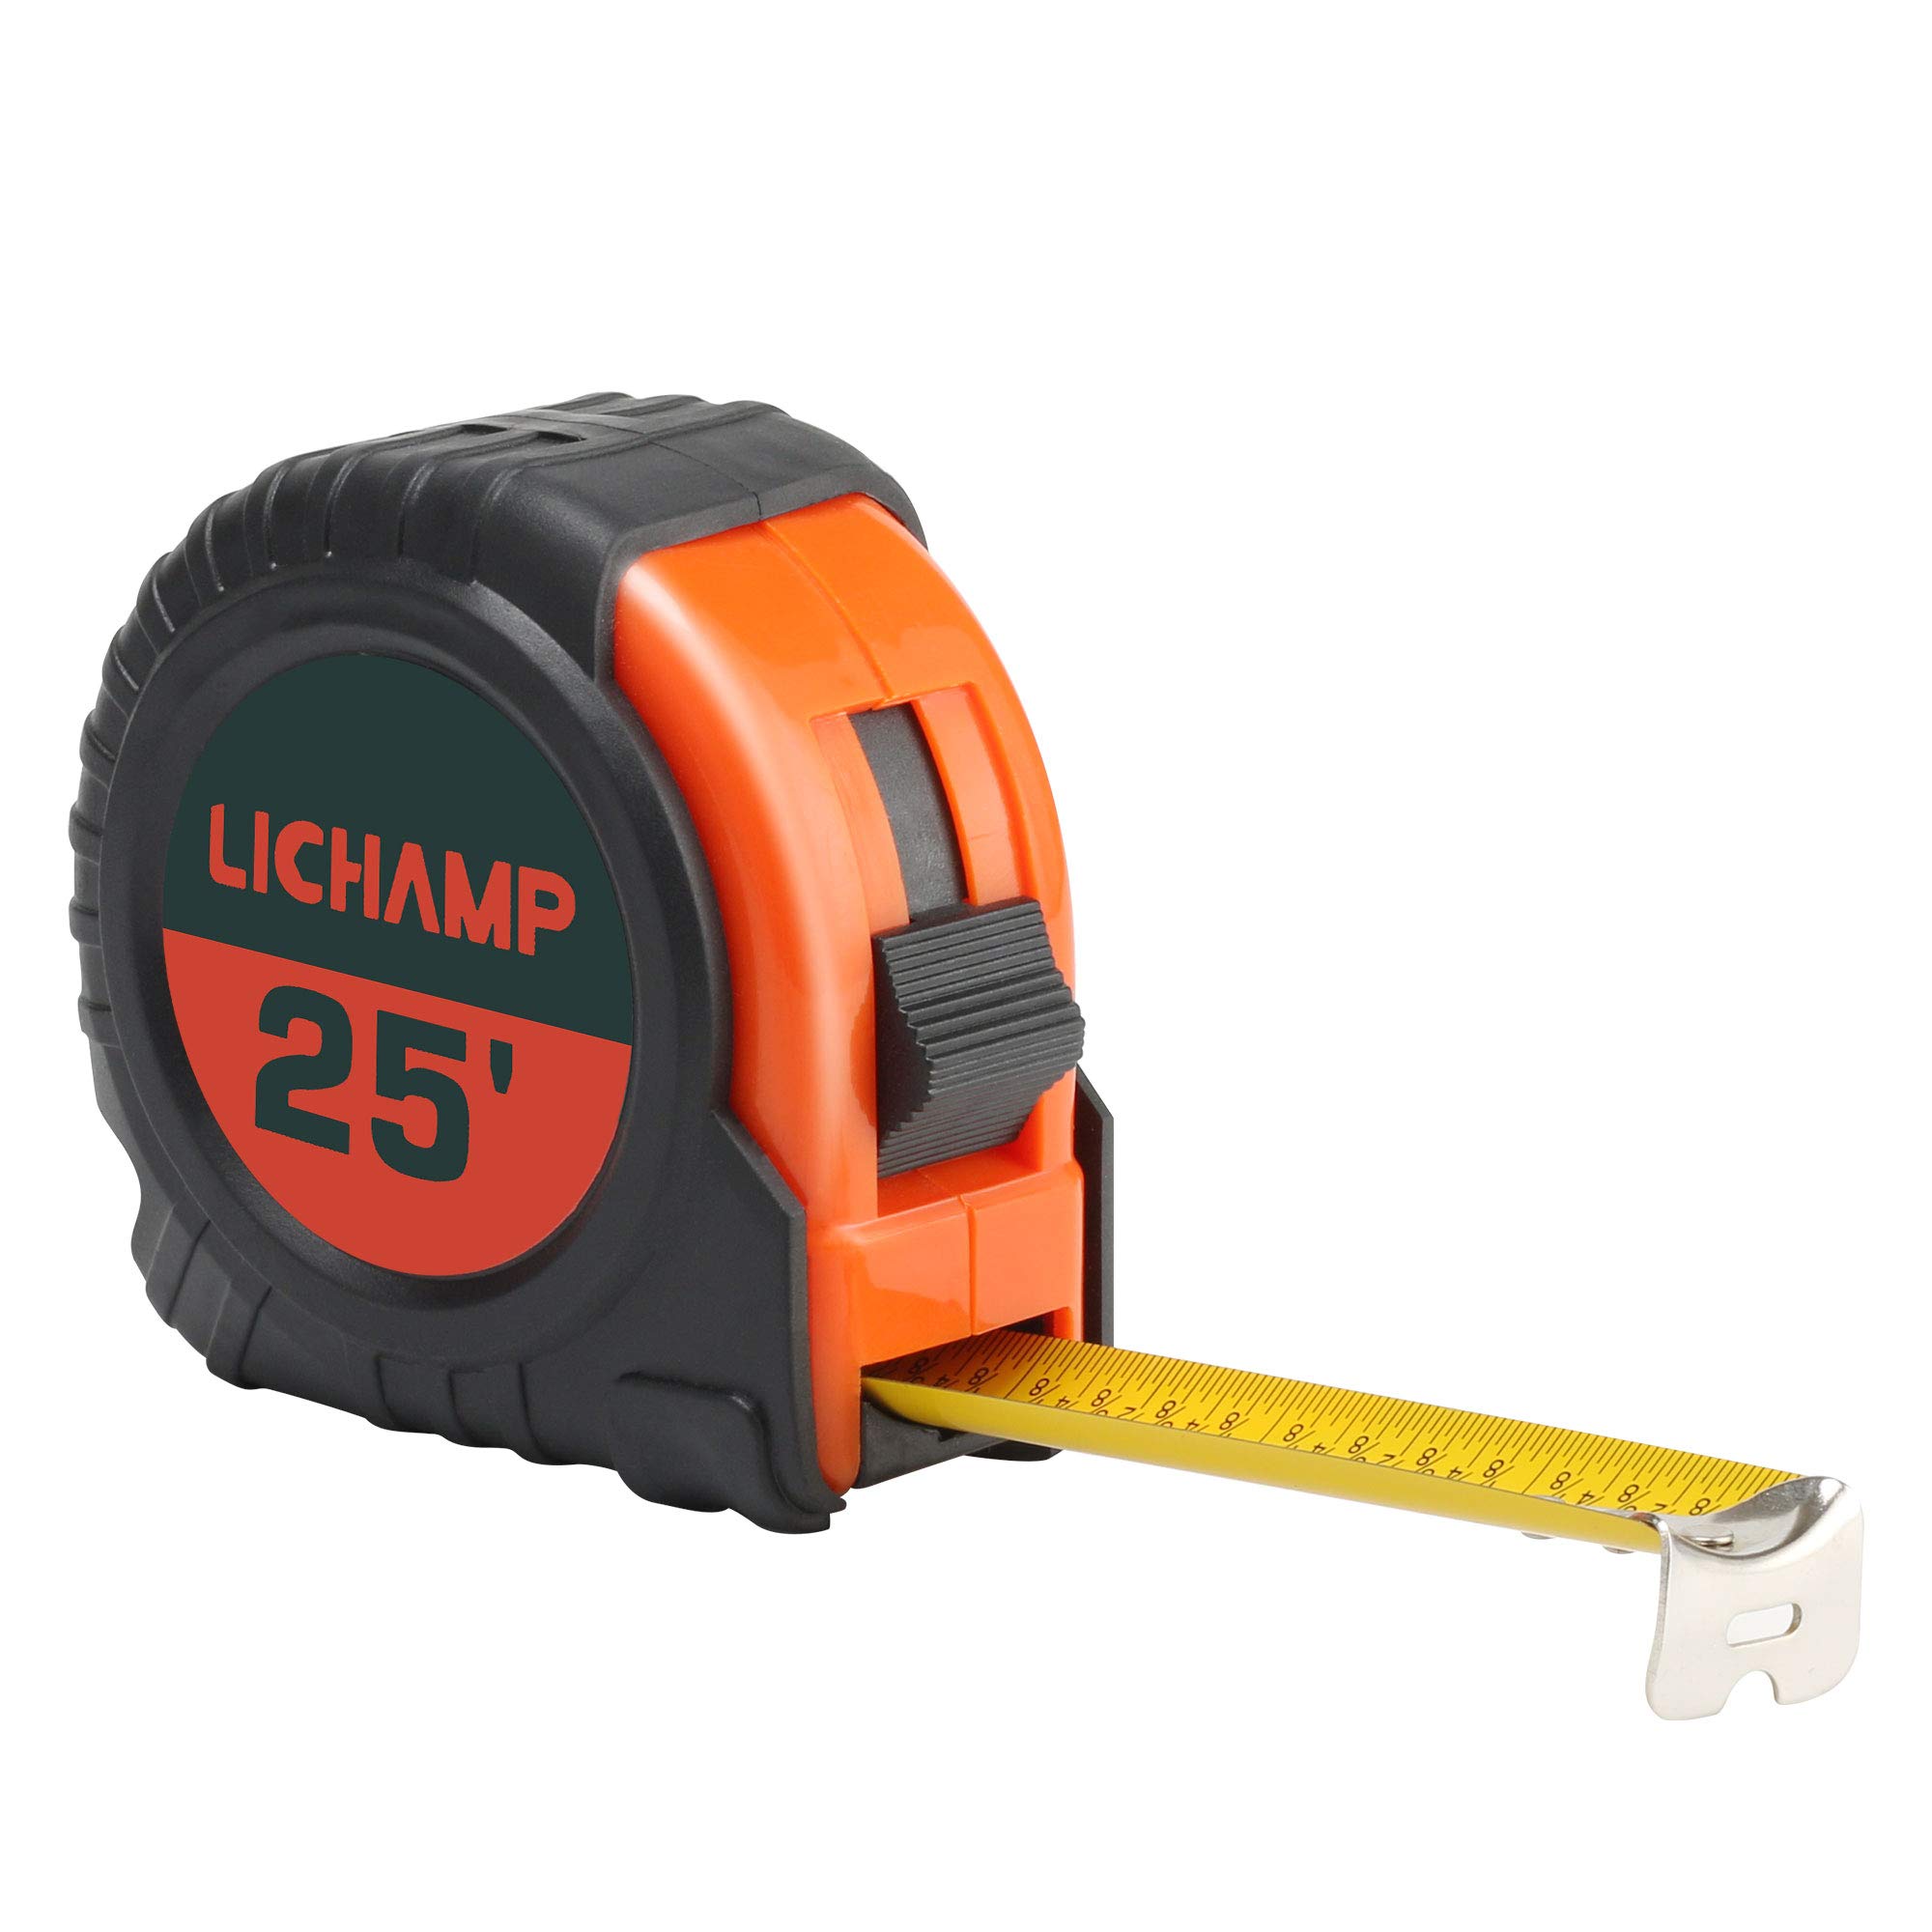 LICHAMP Tape Measure 25 ft, 6 Pack Bulk Easy Read Measuring Tape Retractable with Fractions 1/8, Measurement Tape 25-Foot by 1-Inch